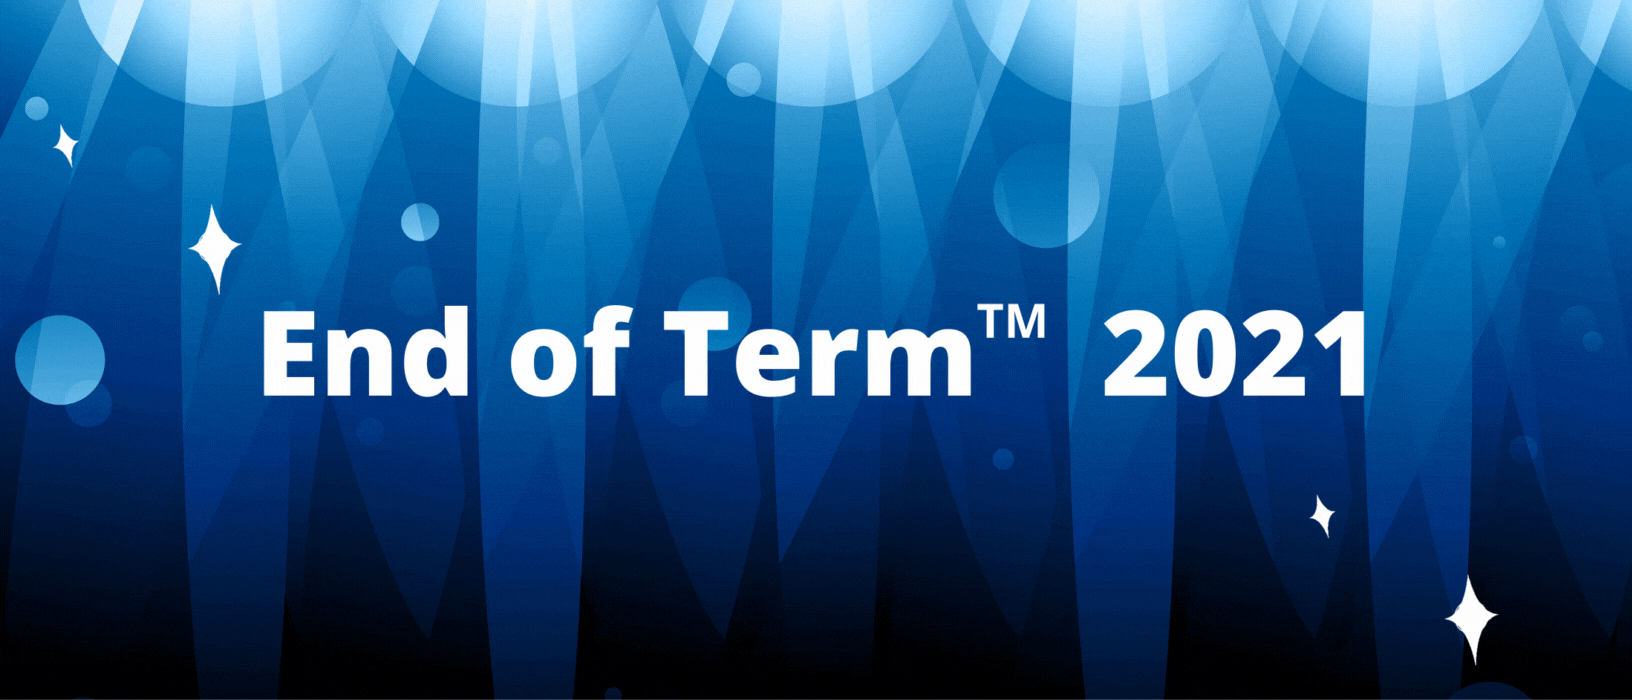 End of Term 2021